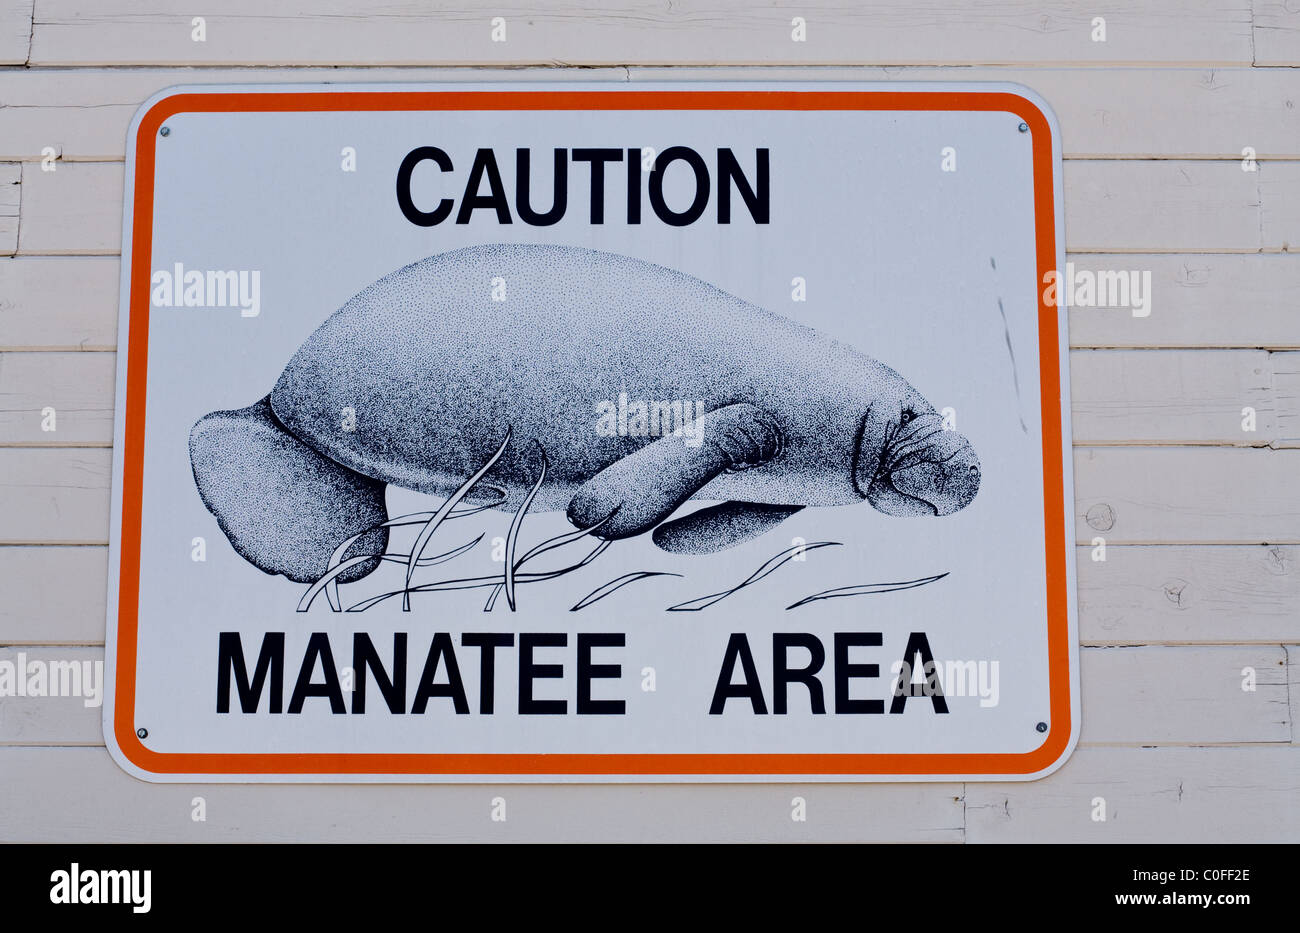 Manatee area warning sign on the side of a building Stock Photo